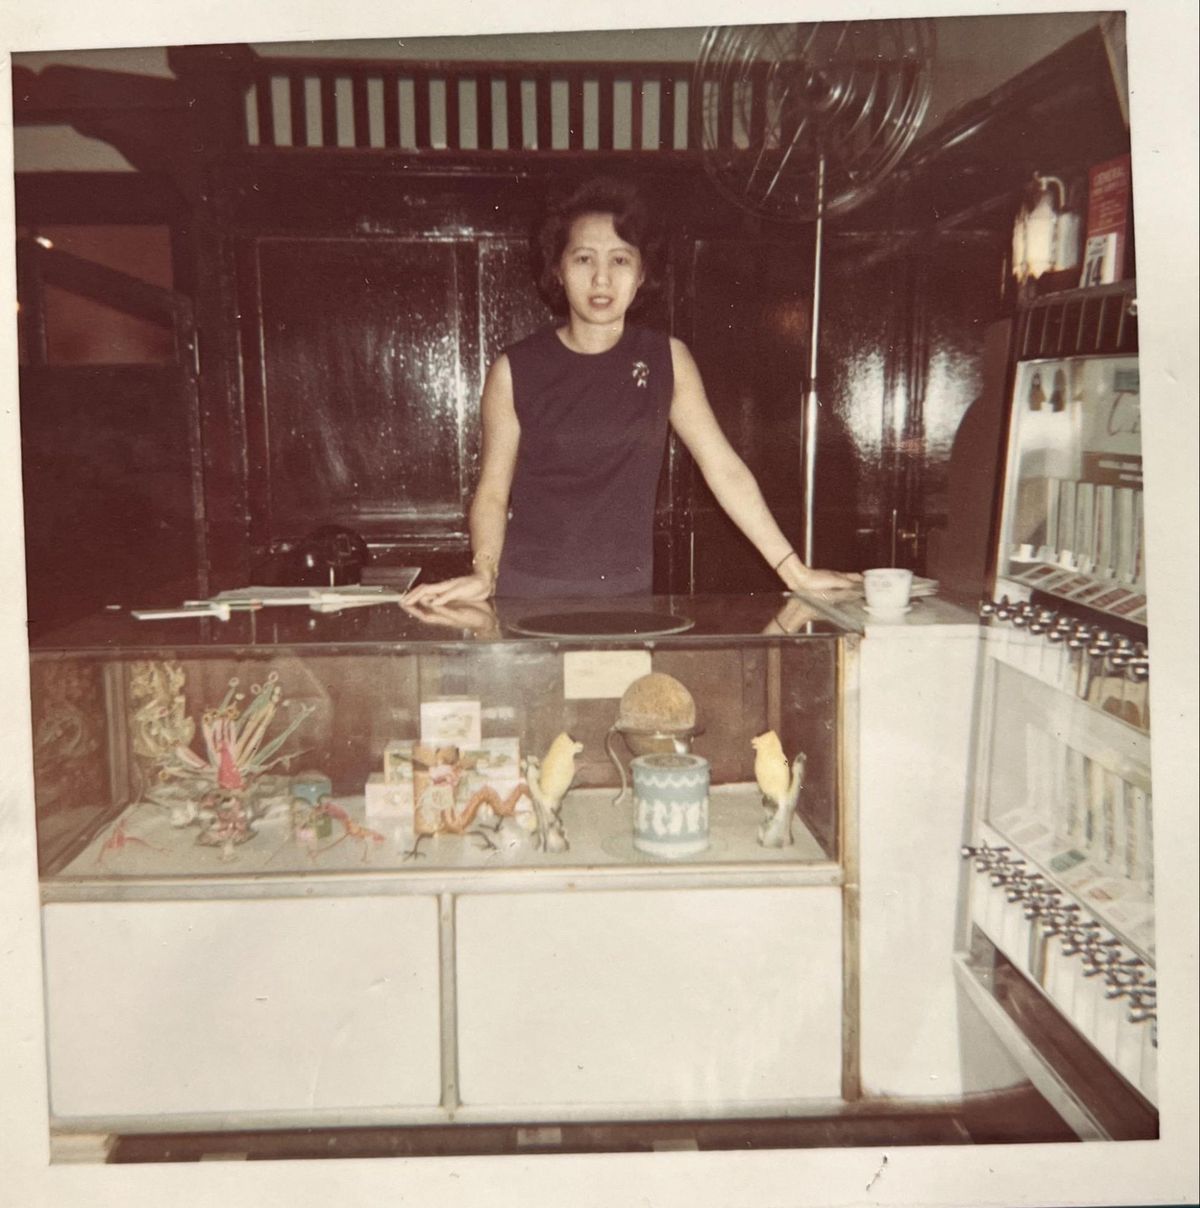 An old photograph of a woman wearing a blue dress, standing behind a glass counter.